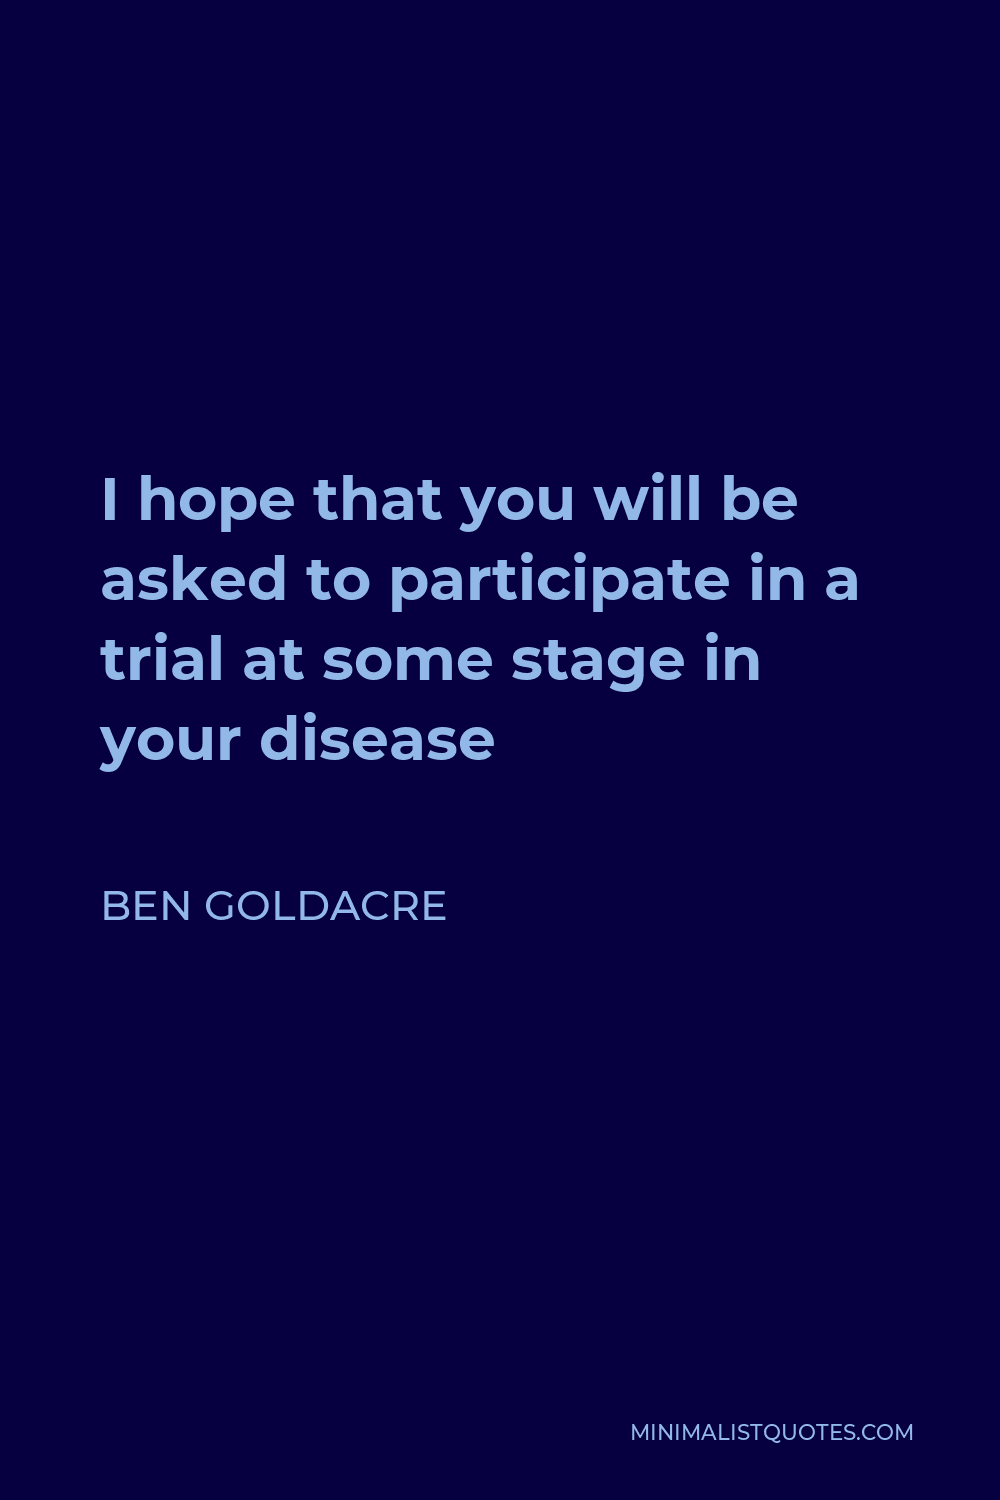 Ben Goldacre Quote - I hope that you will be asked to participate in a trial at some stage in your disease